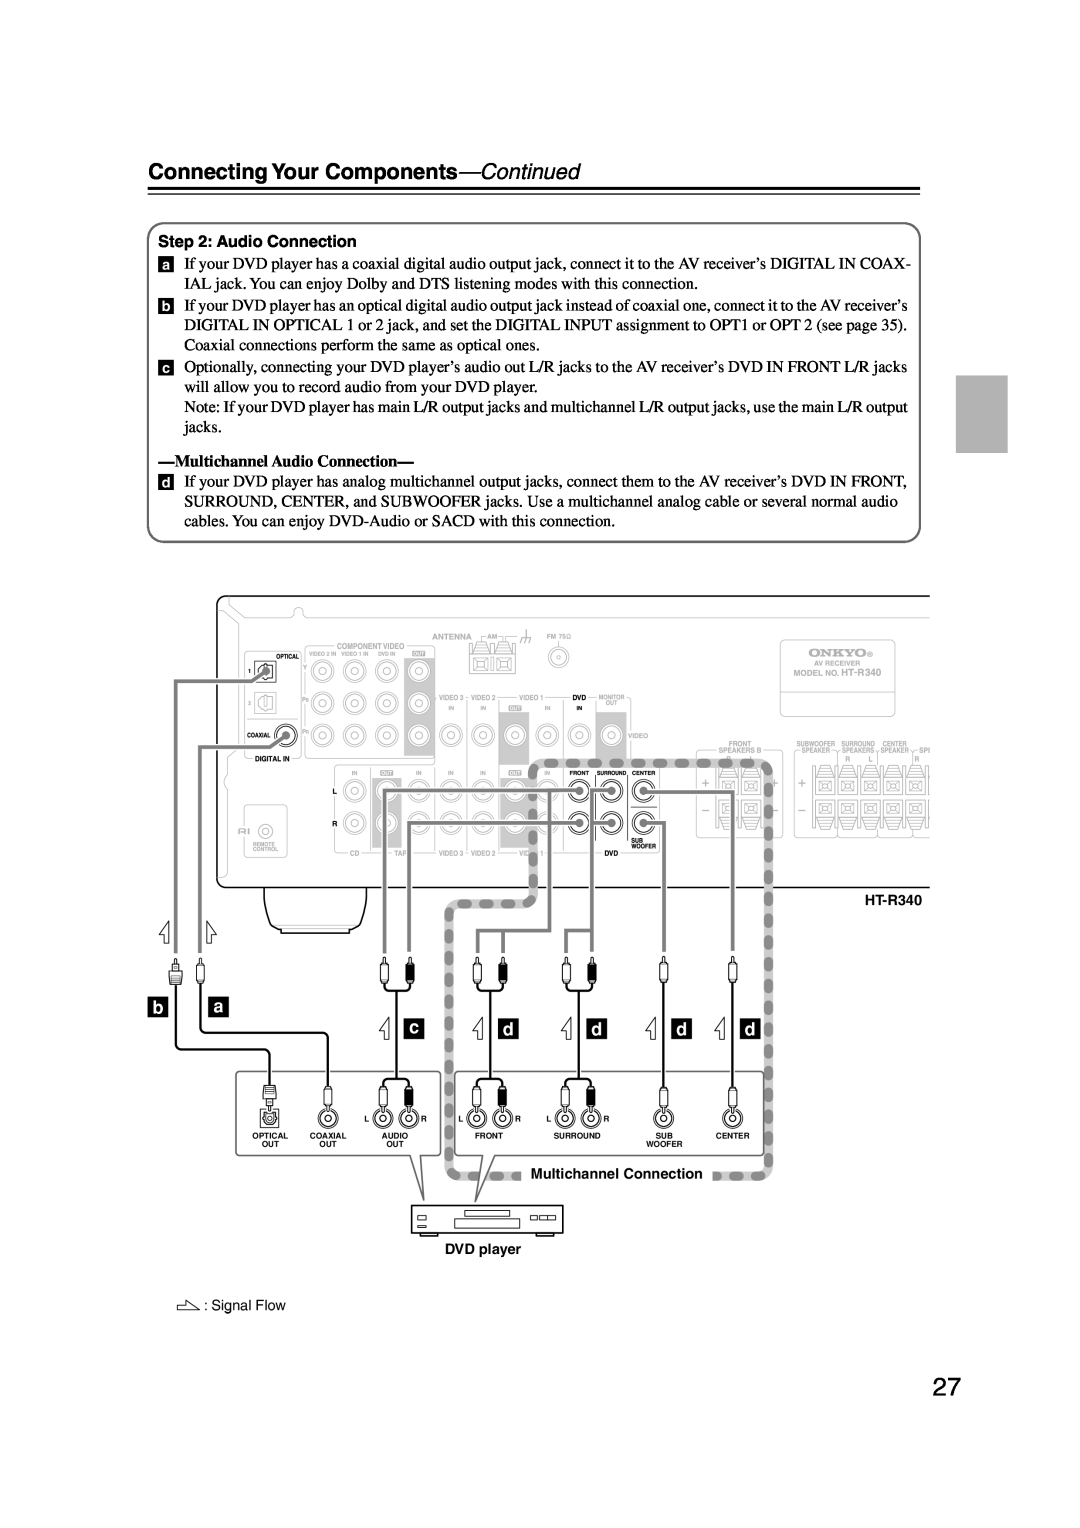 Onkyo HT-S590 instruction manual b a c, Connecting Your Components-Continued, Audio Connection 